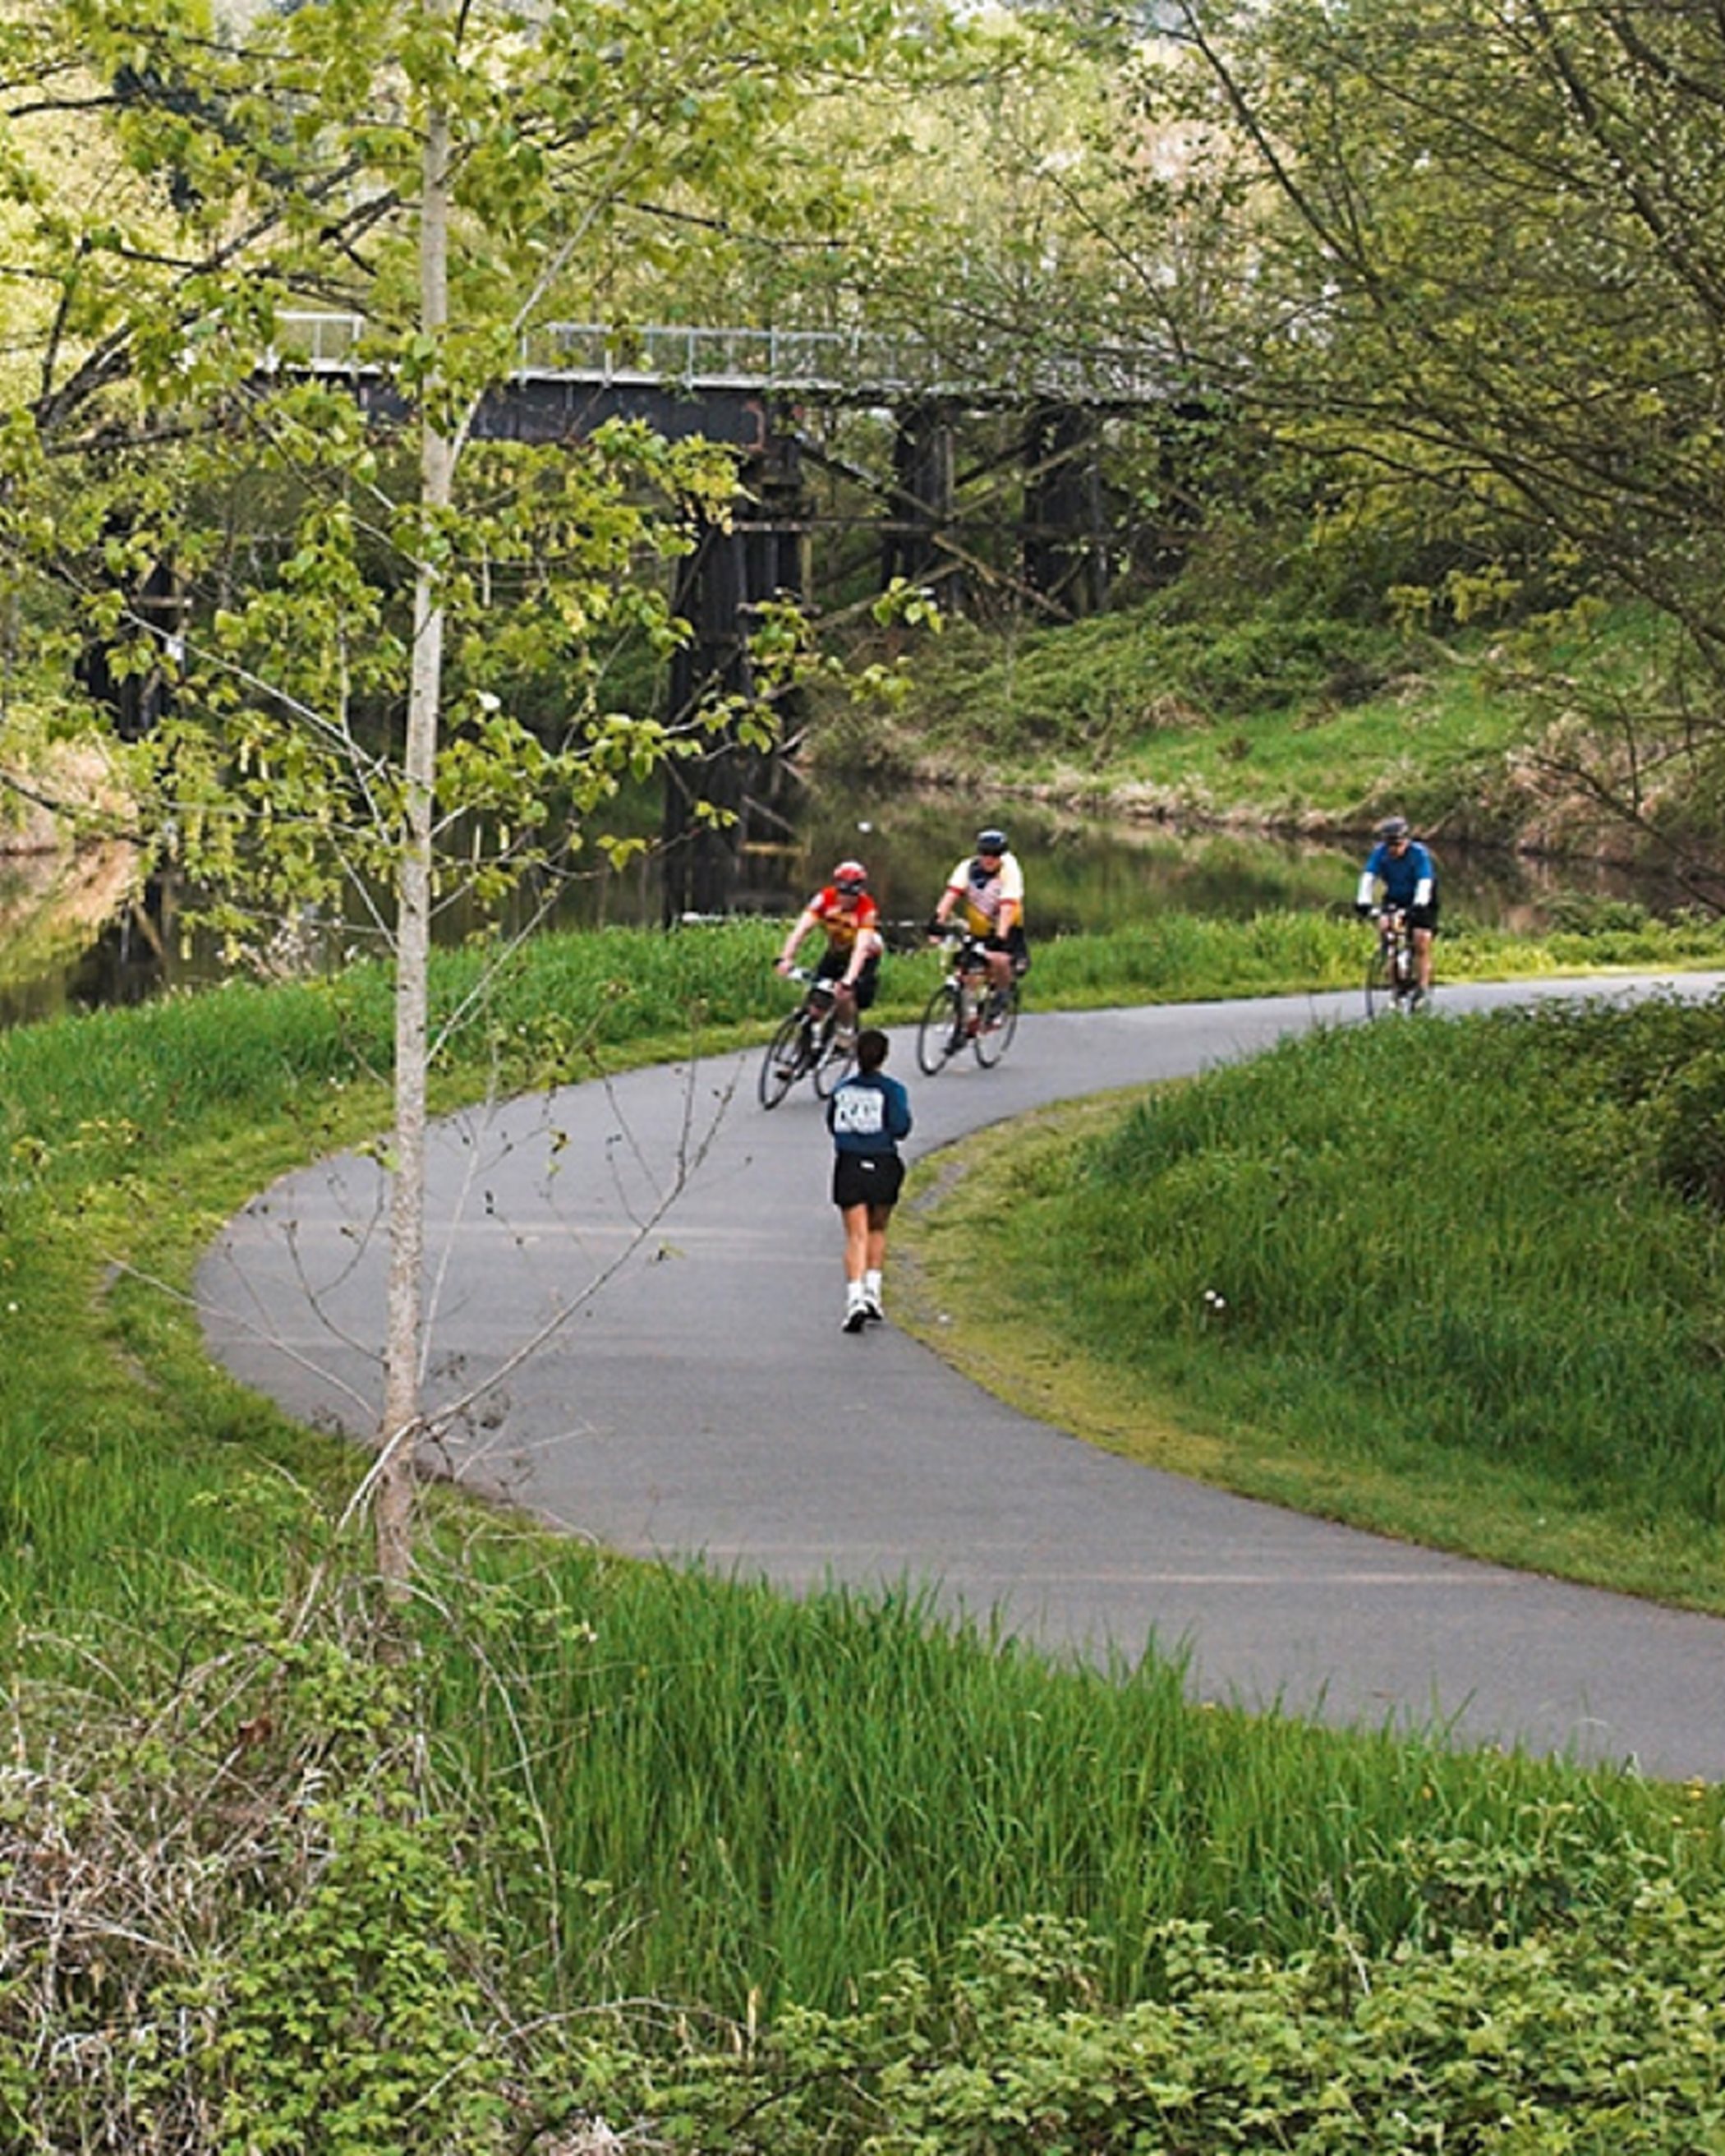 A bike trail with three cyclists and a runner, all surrounded by lush greenery